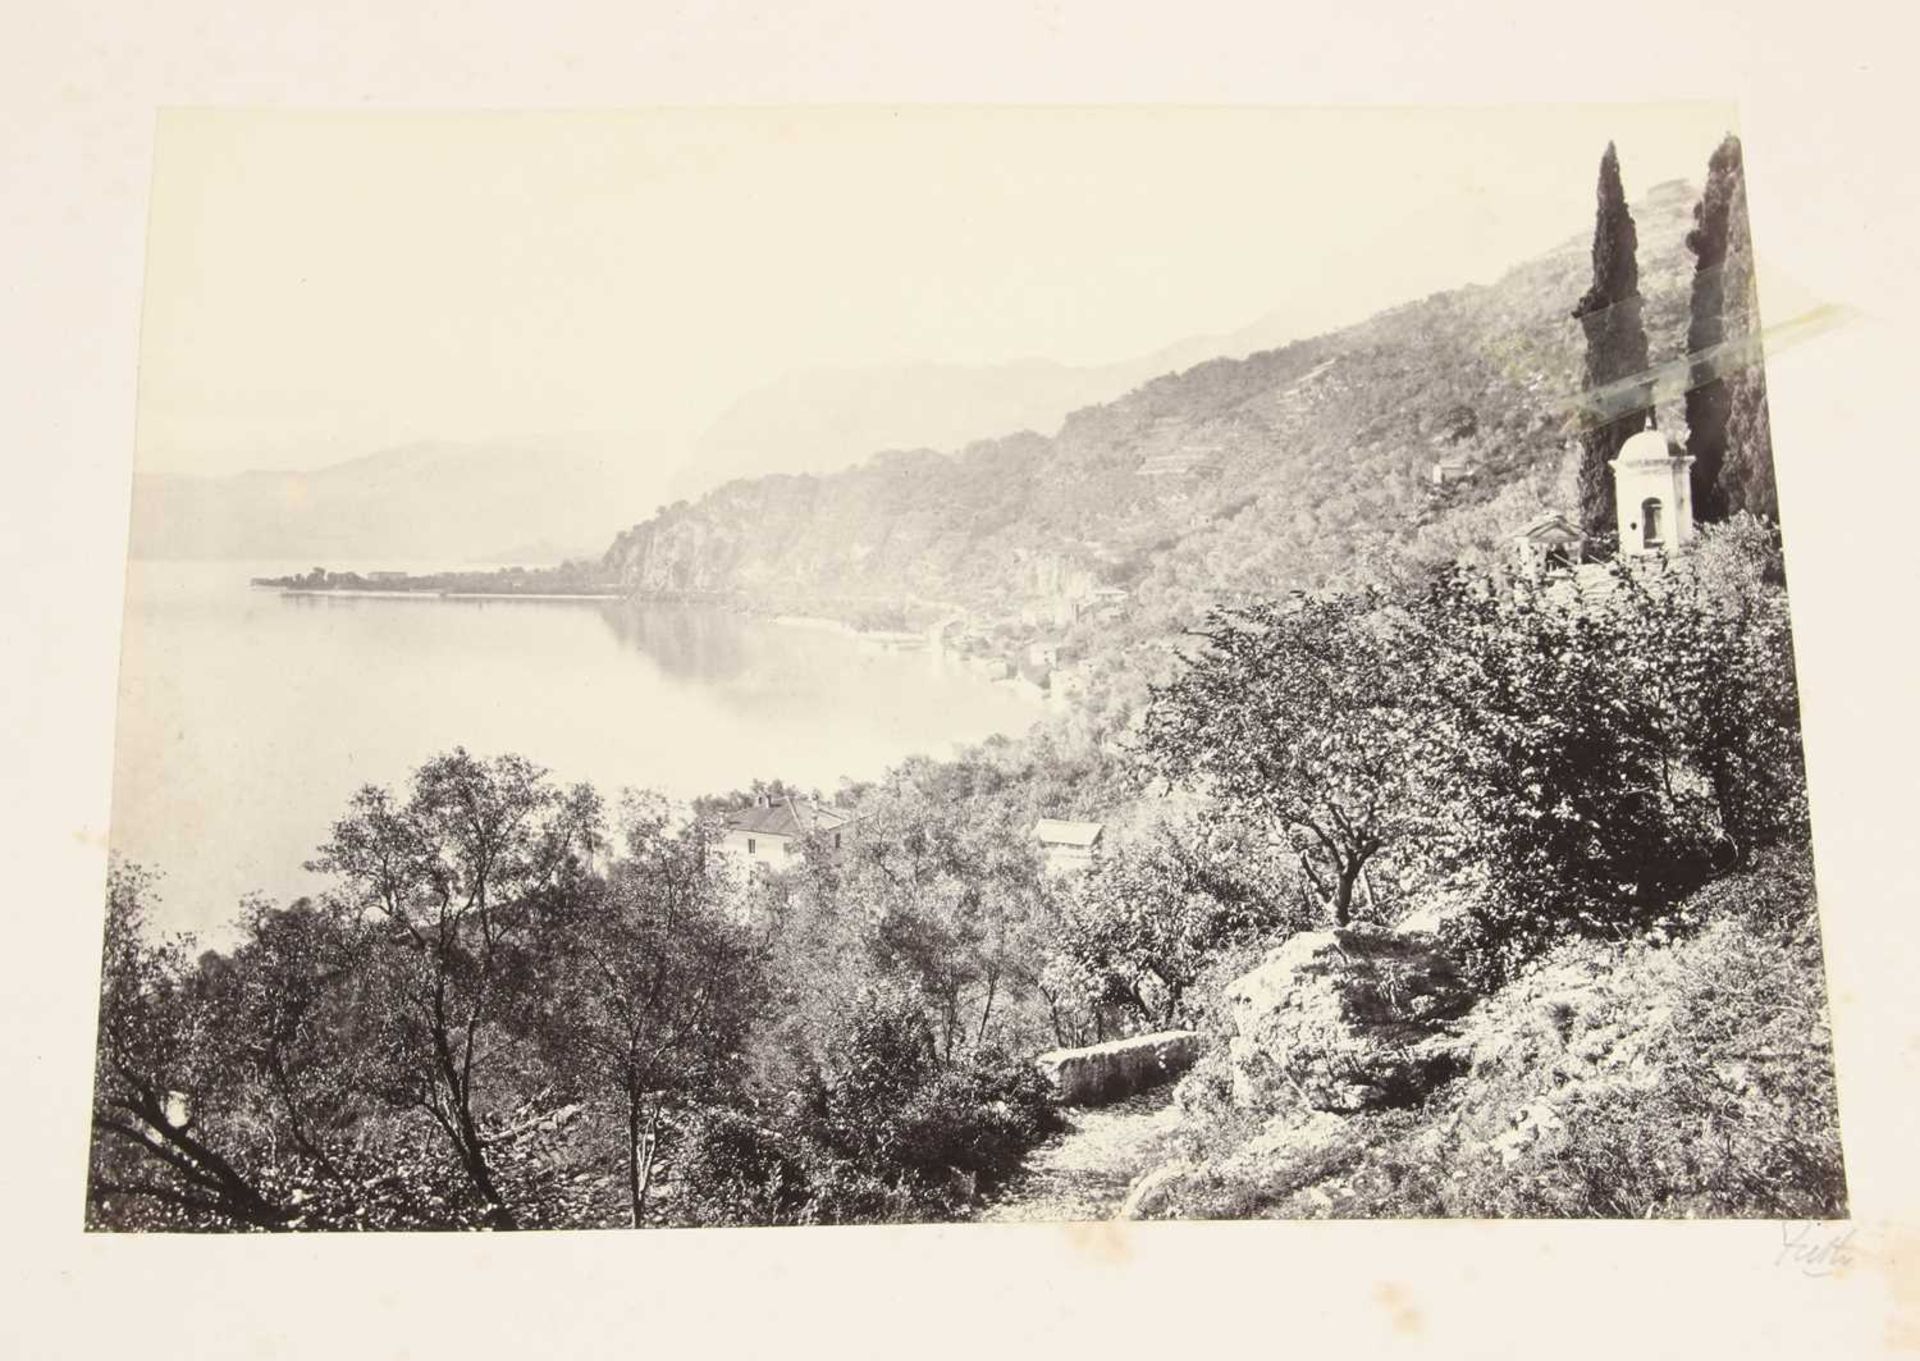 Francis Frith (1822-1898) 'Pictures from Switzerland and the Italian Lakes, photographed by Frith' - Image 4 of 10